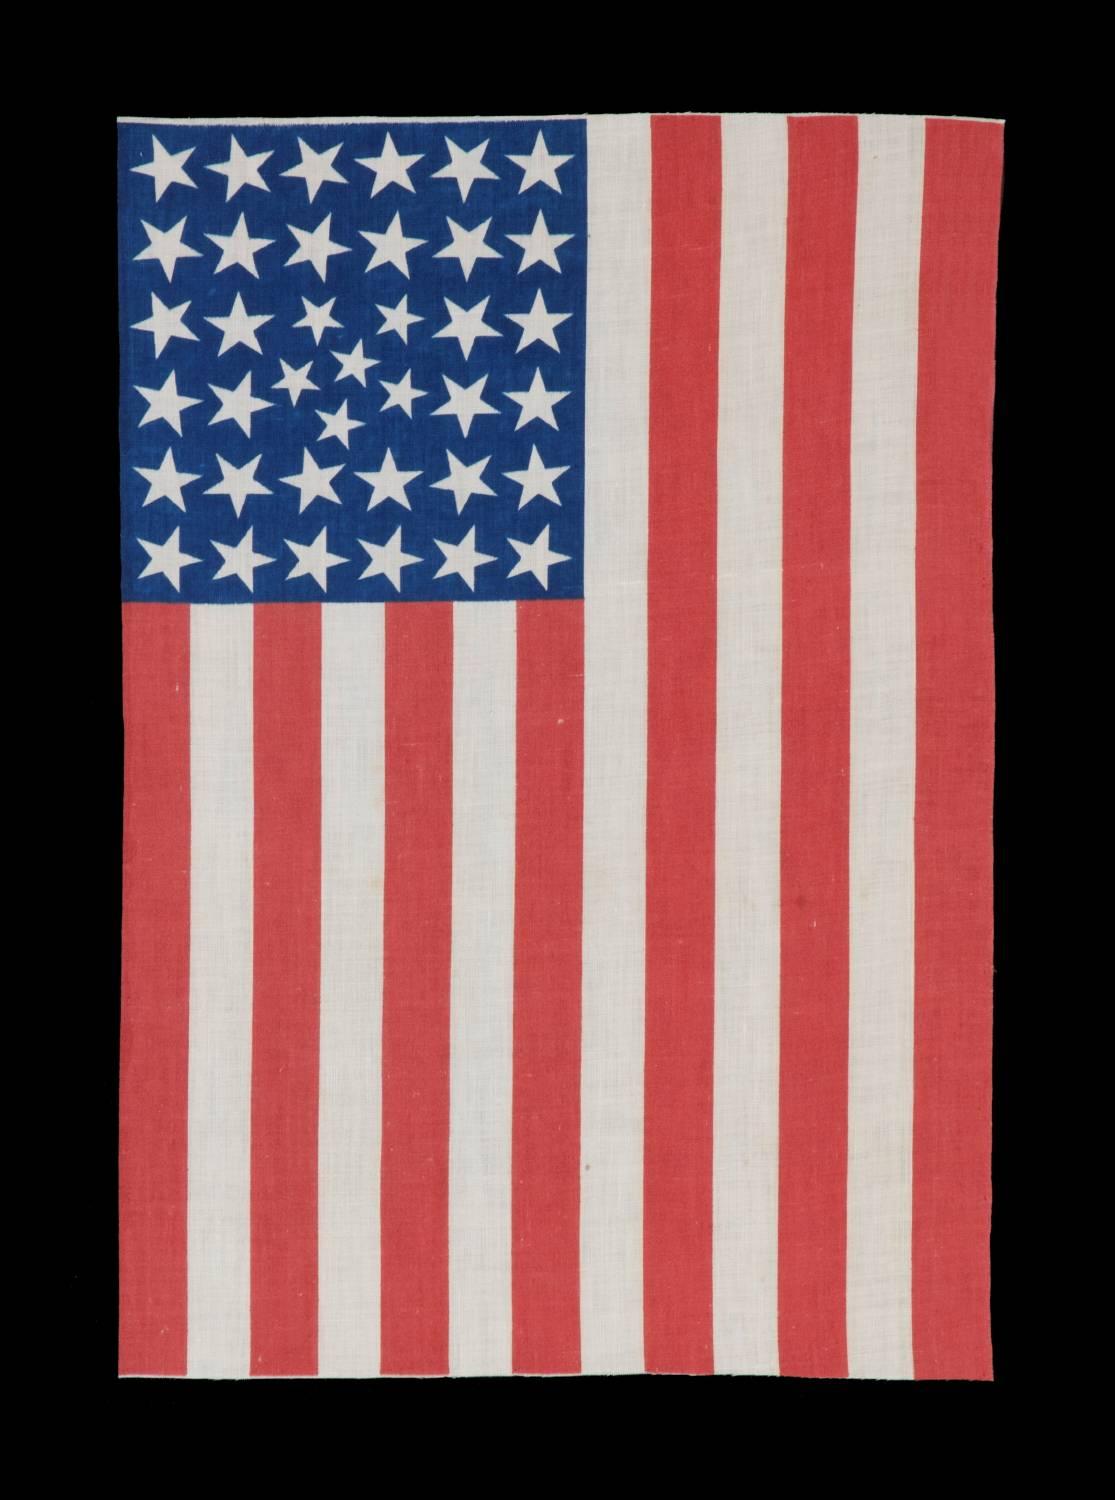 38 stars in a lineal arrangement that bears a cluster of six small stars within a lineal pattern of larger stars, 1876-1889, Colorado statehood:

38 star American national parade flag, printed on cotton. This is an extremely rare example of a